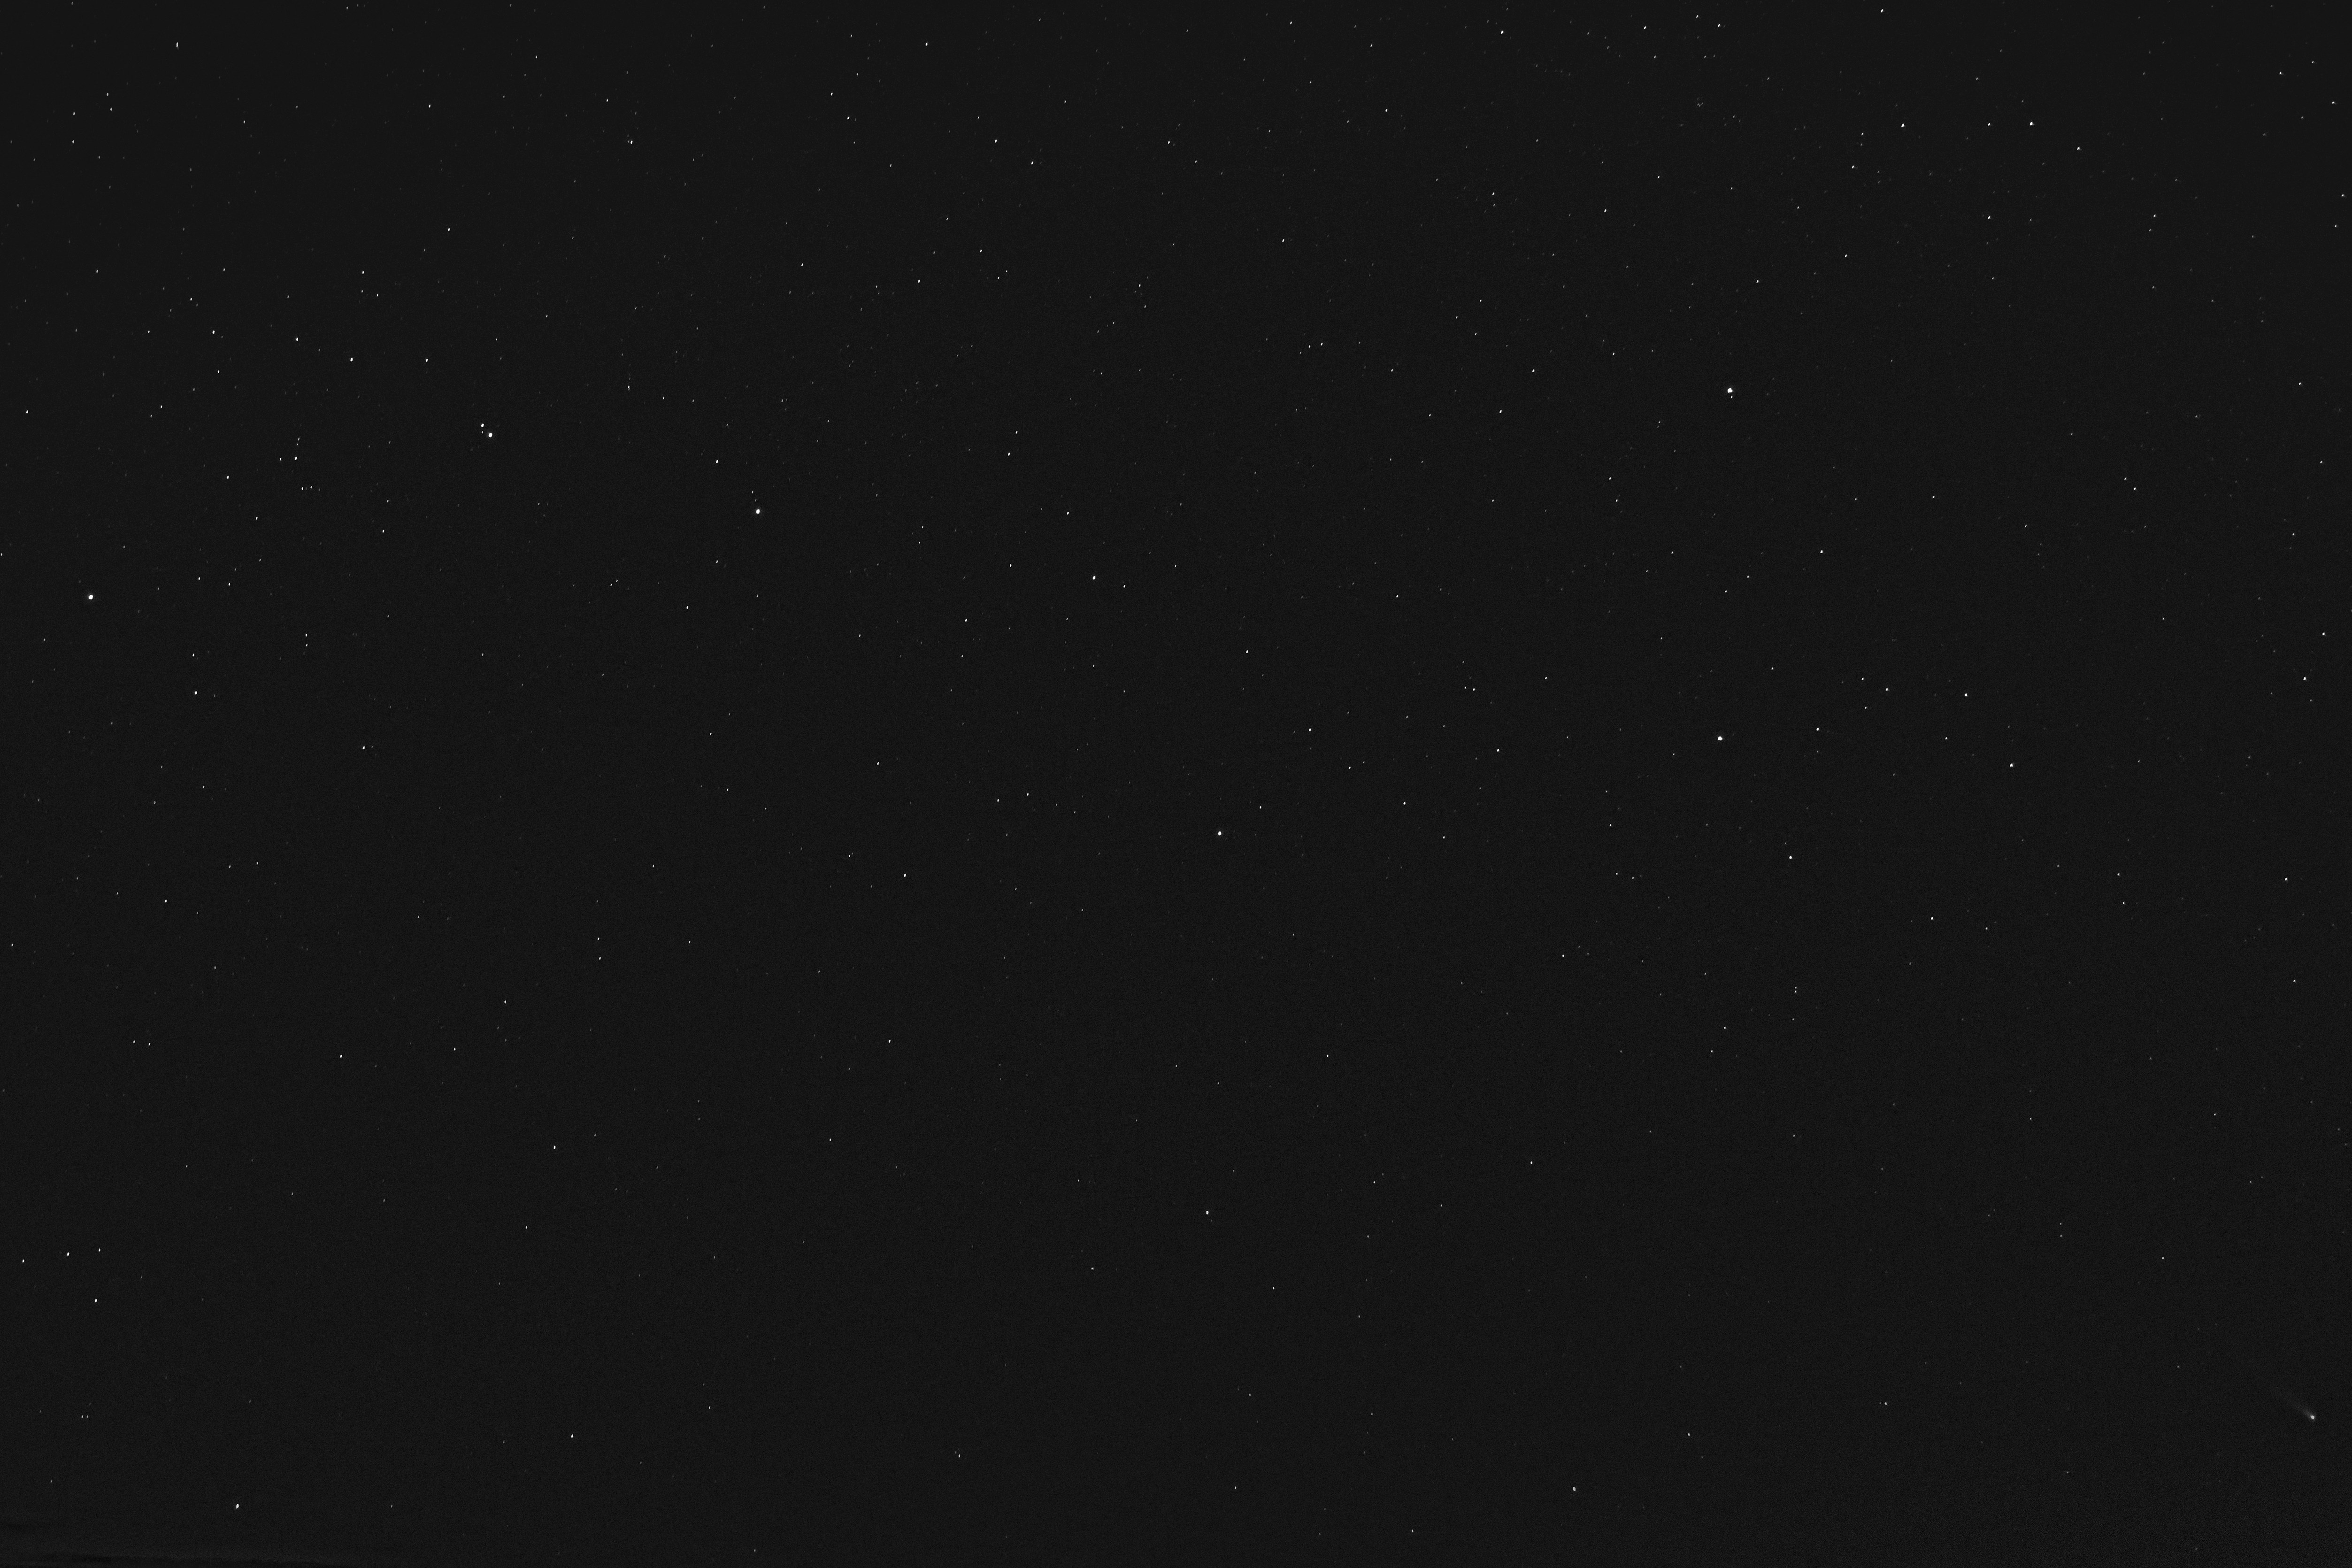 The Big Dipper with Neowise, C/2020 F3 in the bottom right